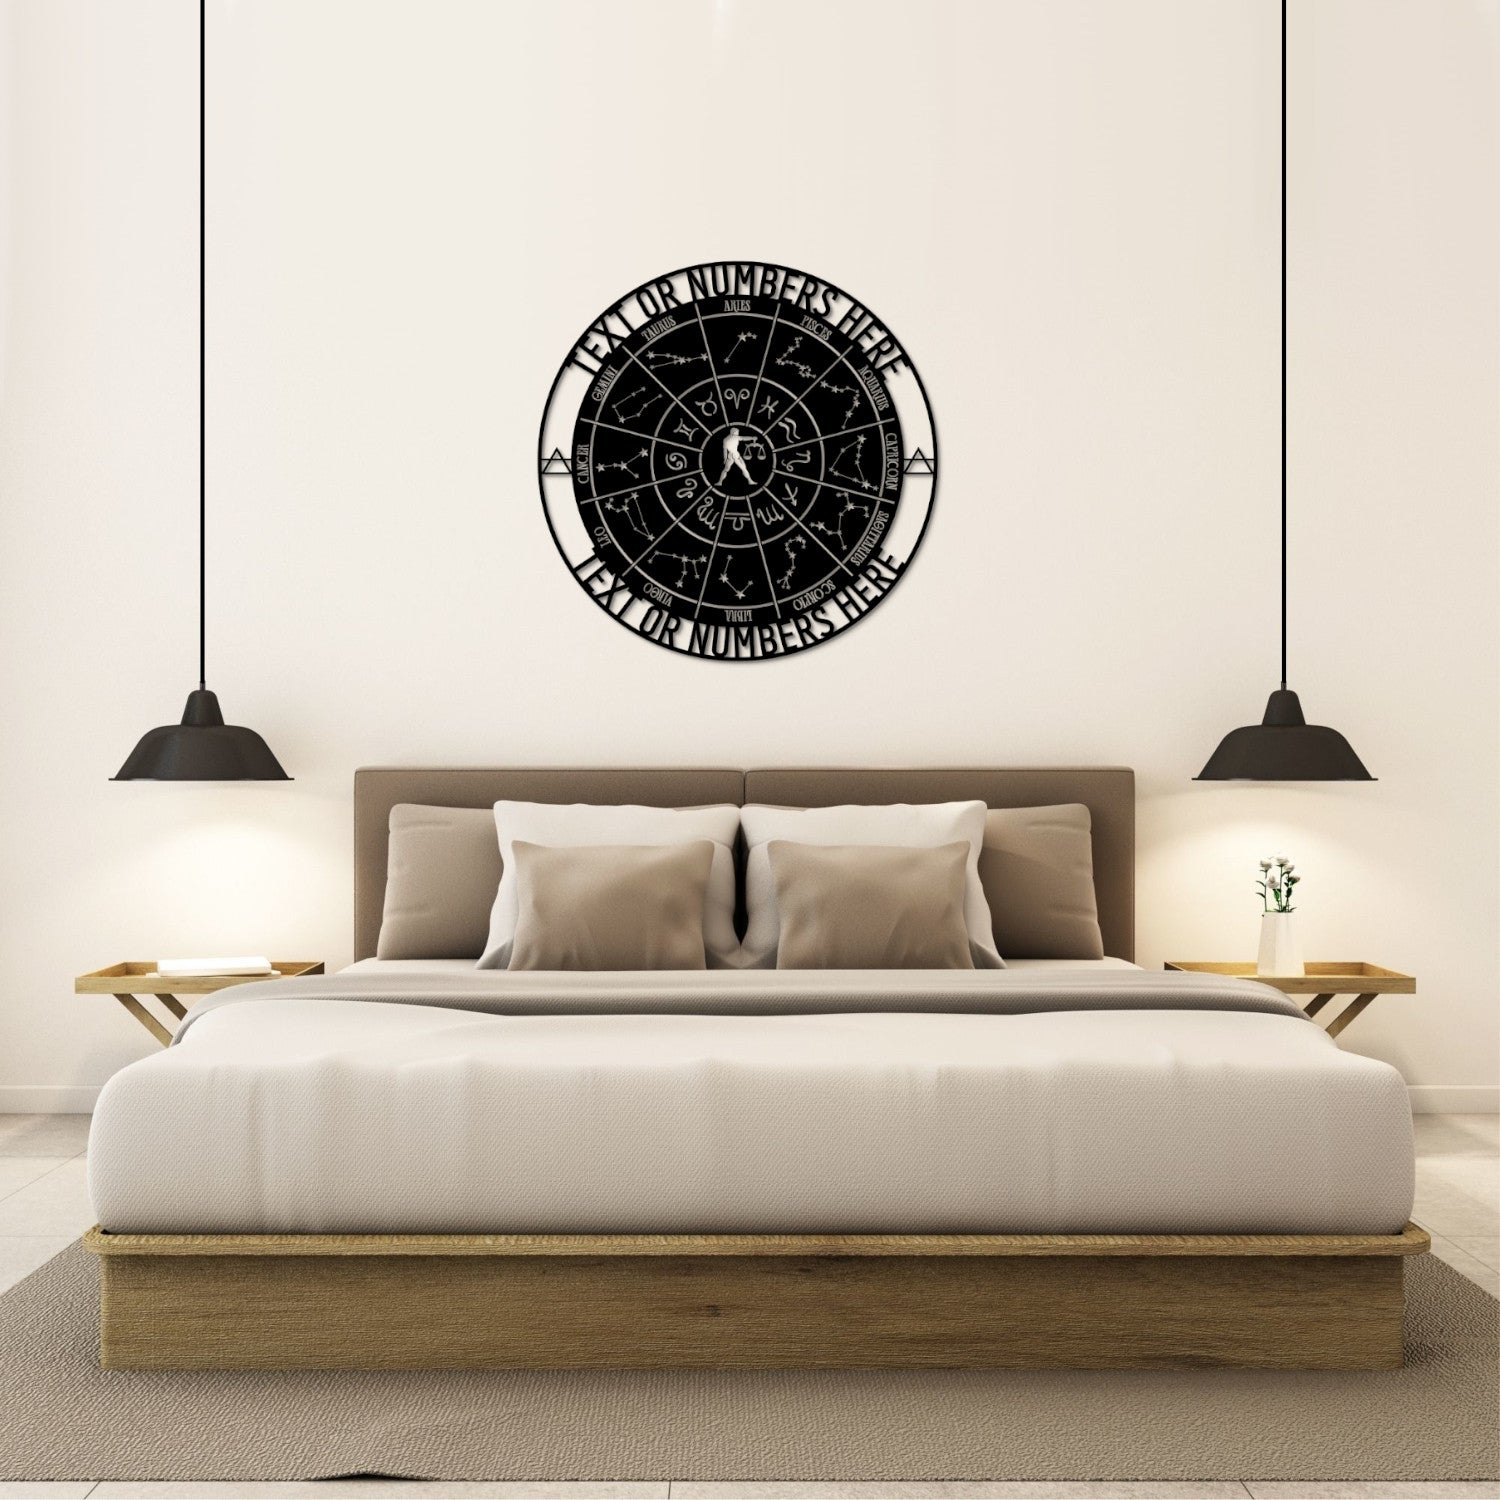 Personalized Libra Zodiac Wheel Name Metal Sign Gift. Custom Astrology Wall Decor. Celestial Gifts. Decorative Libra Star Sign Wall Hanging